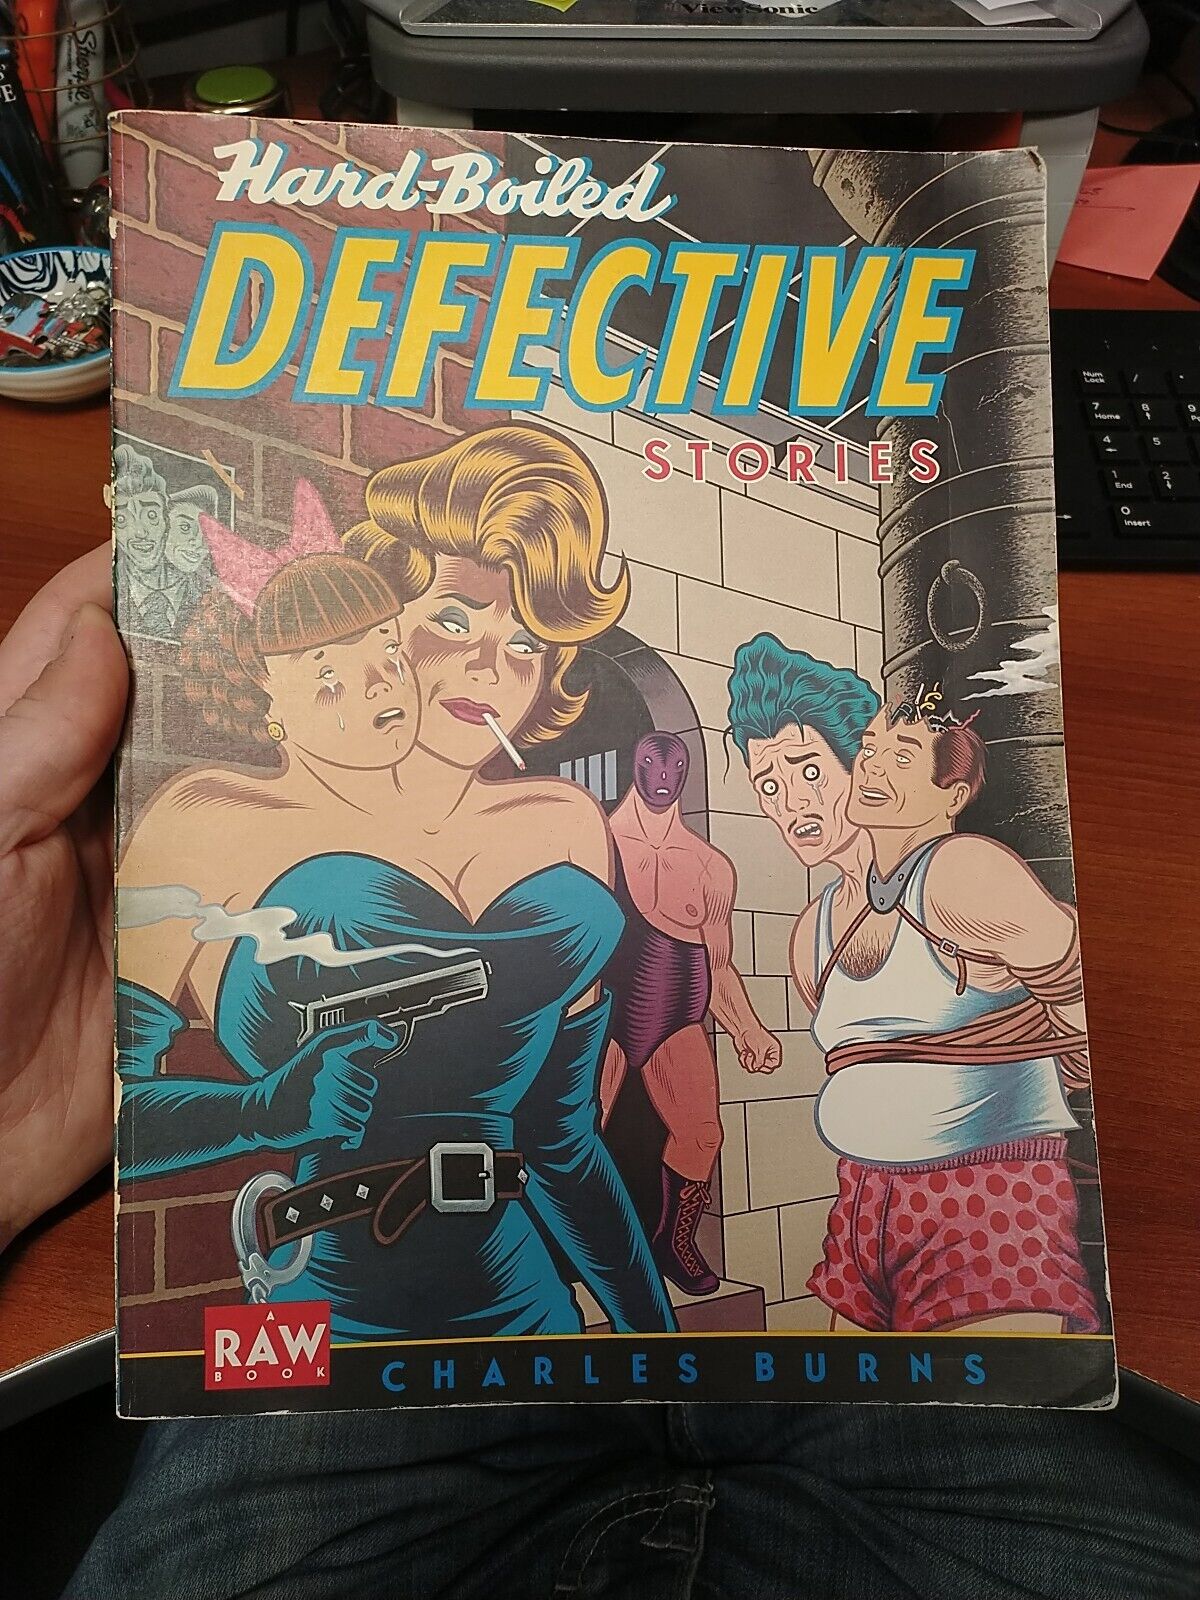 Hard-Boiled Defective Stories (Pantheon 1988)